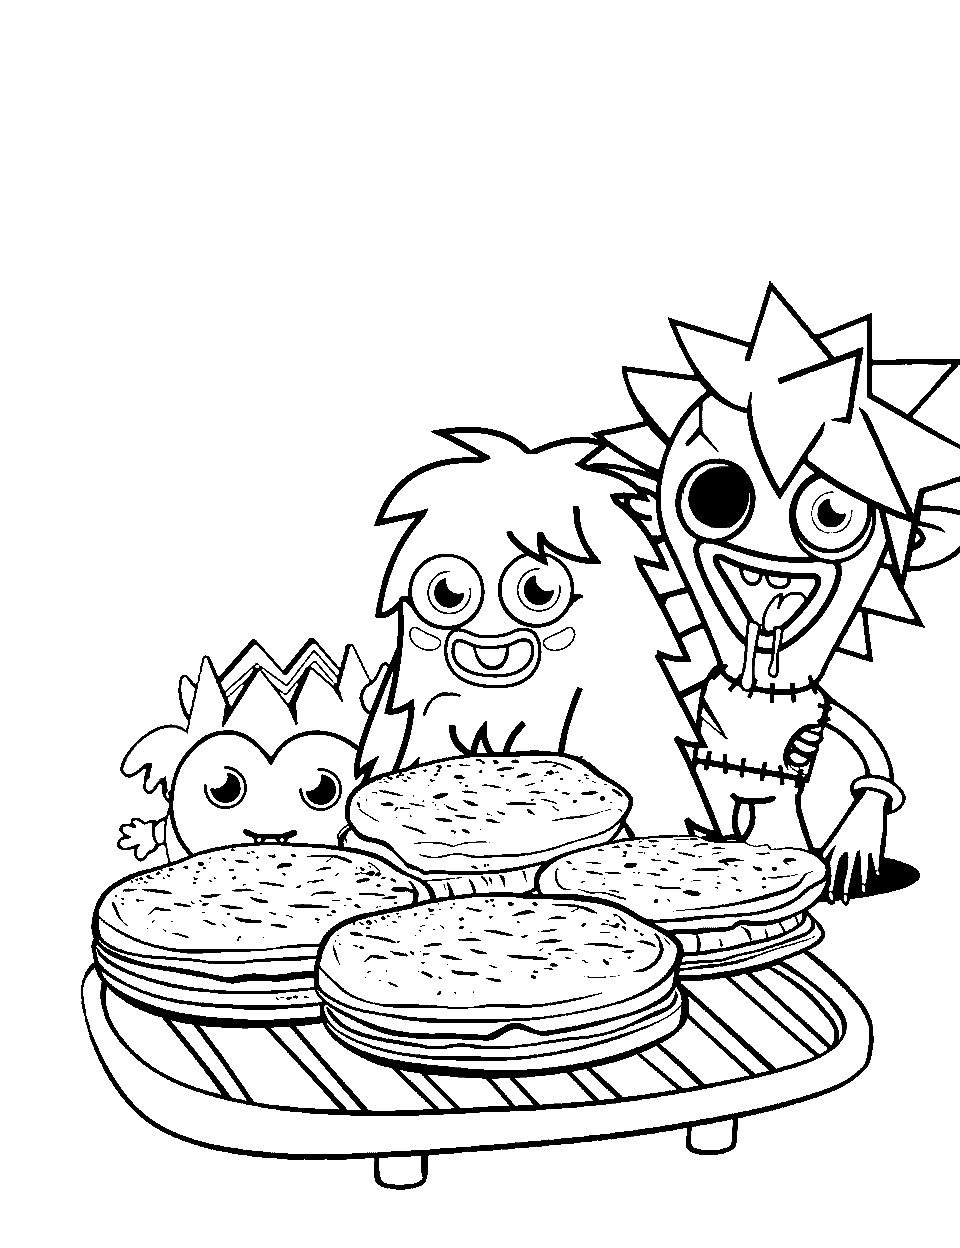 Moshi Monsters Having a Picnic Monster Coloring Page - A group of Moshi Monsters enjoying a picnic.